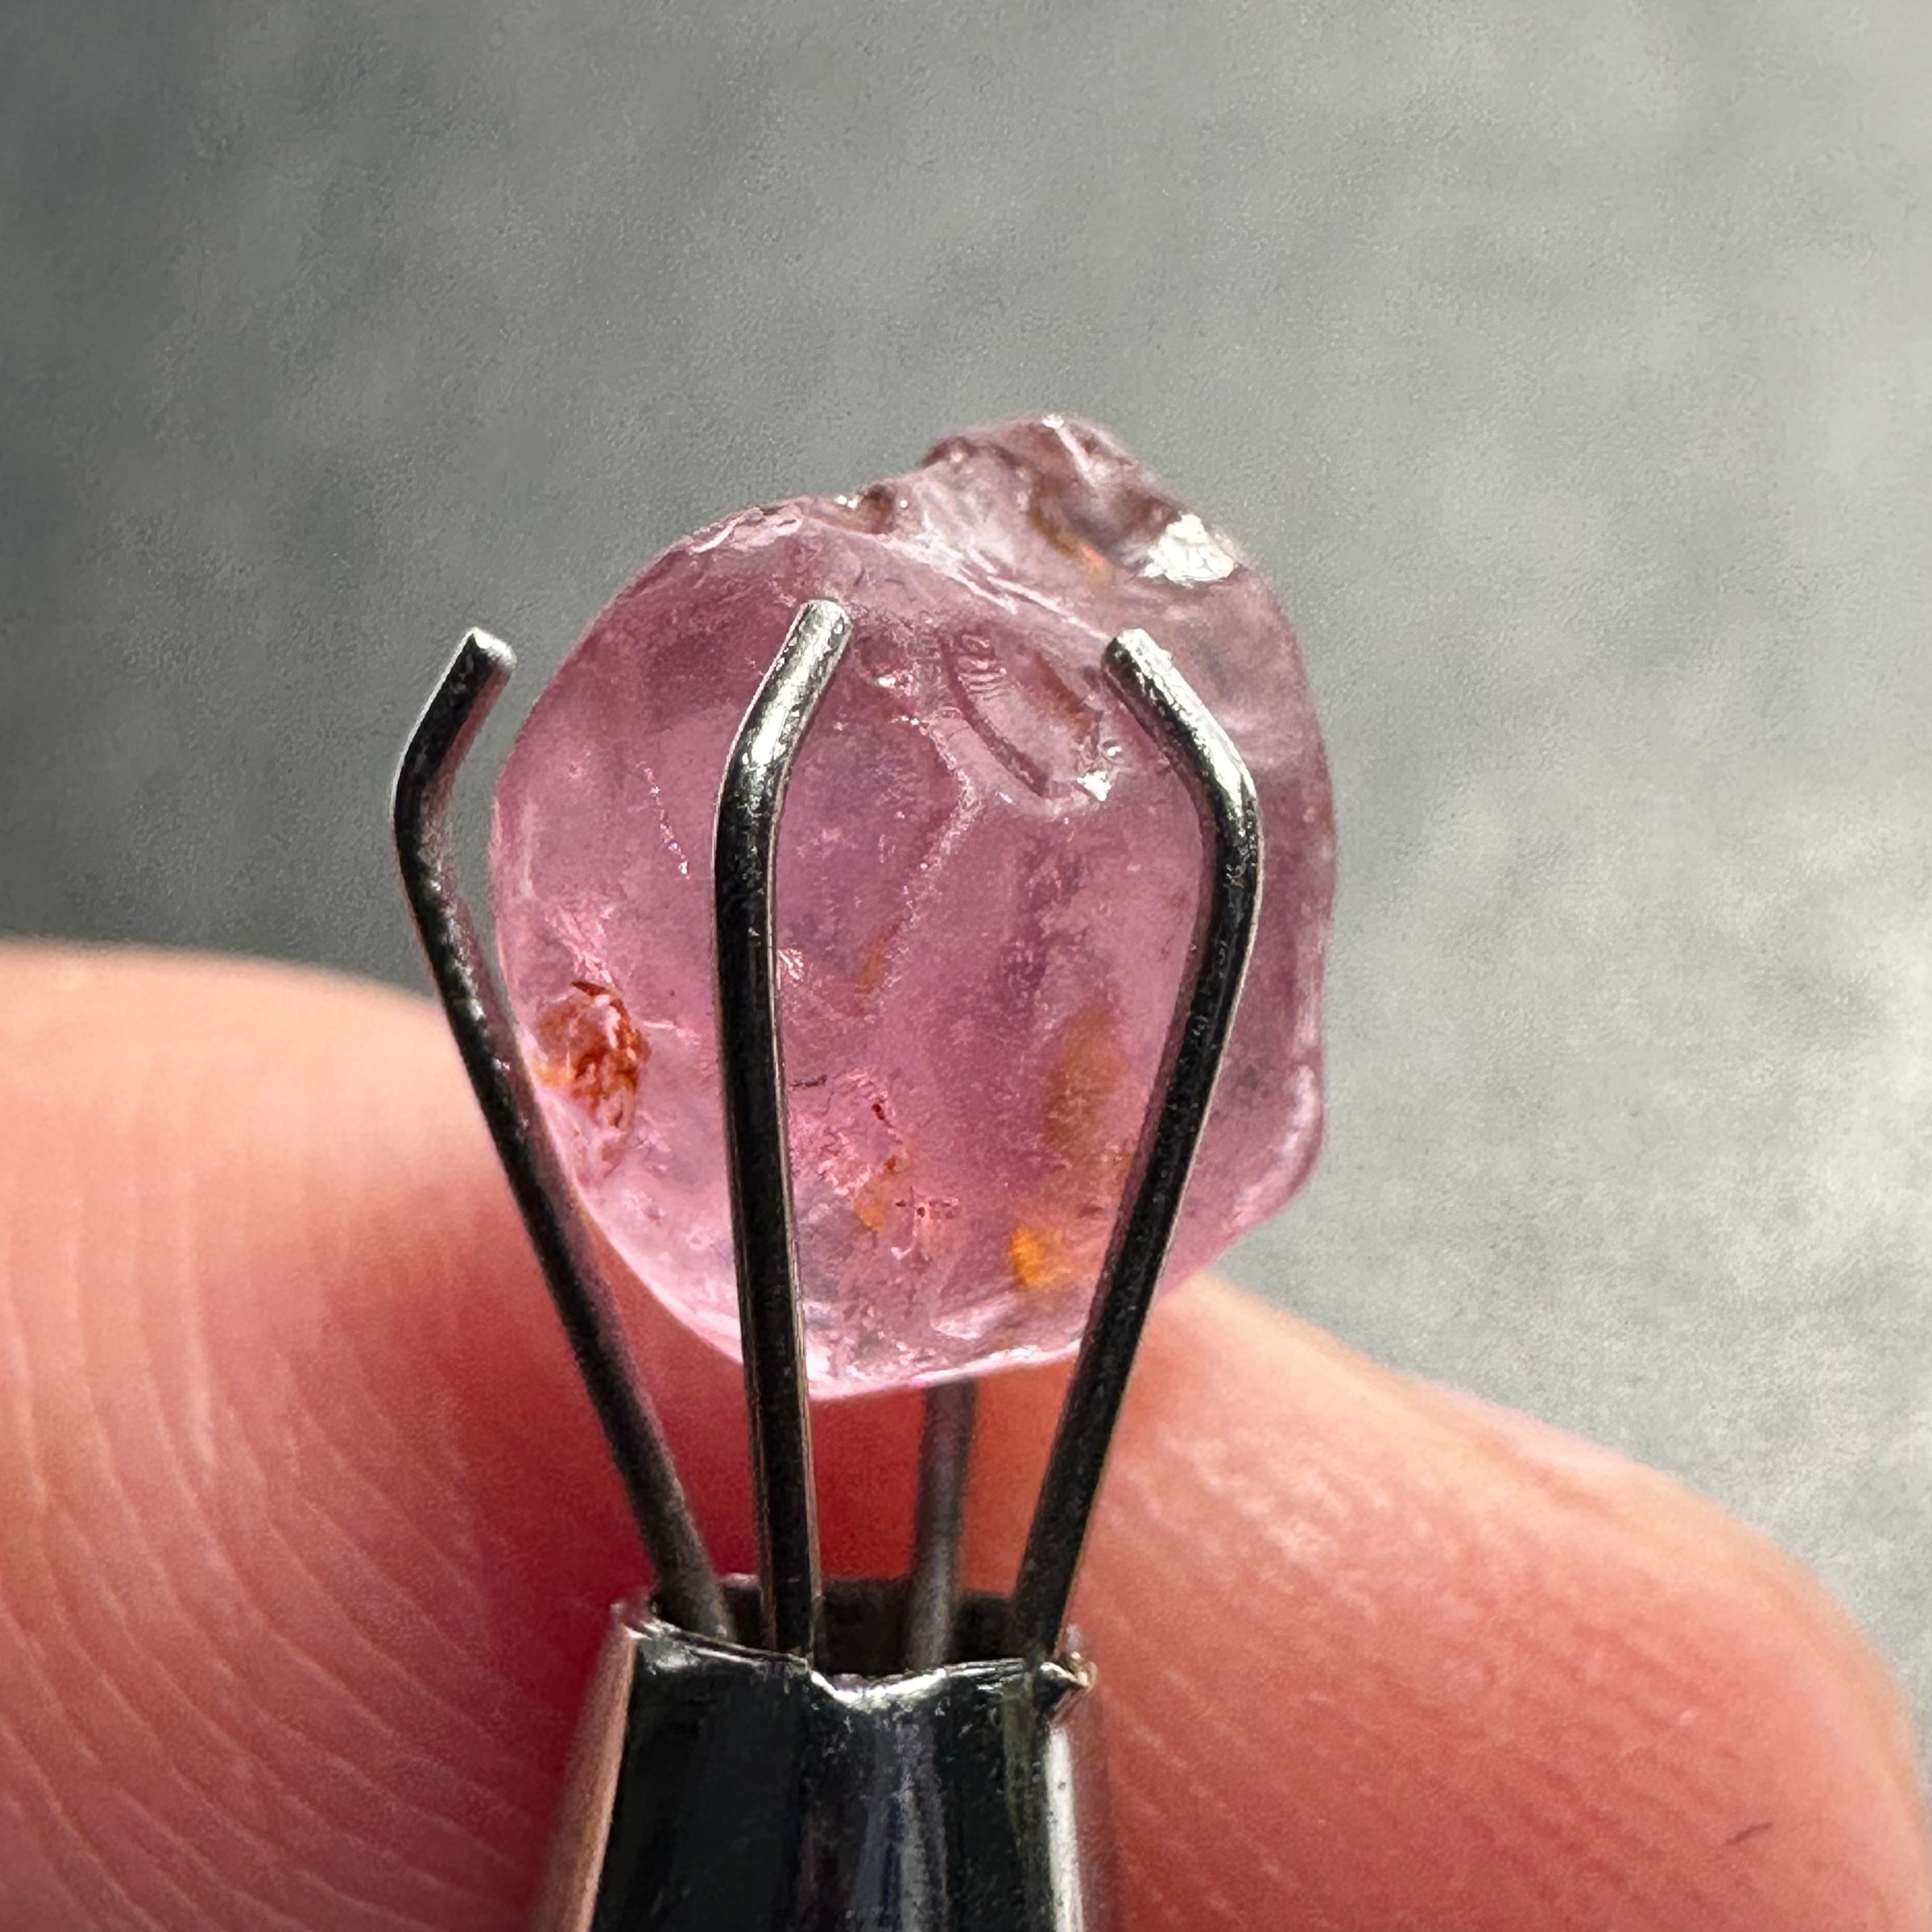 2.80Ct Pink Spinel Tanzania Vs-Vvs + Silky Untreated Unheated